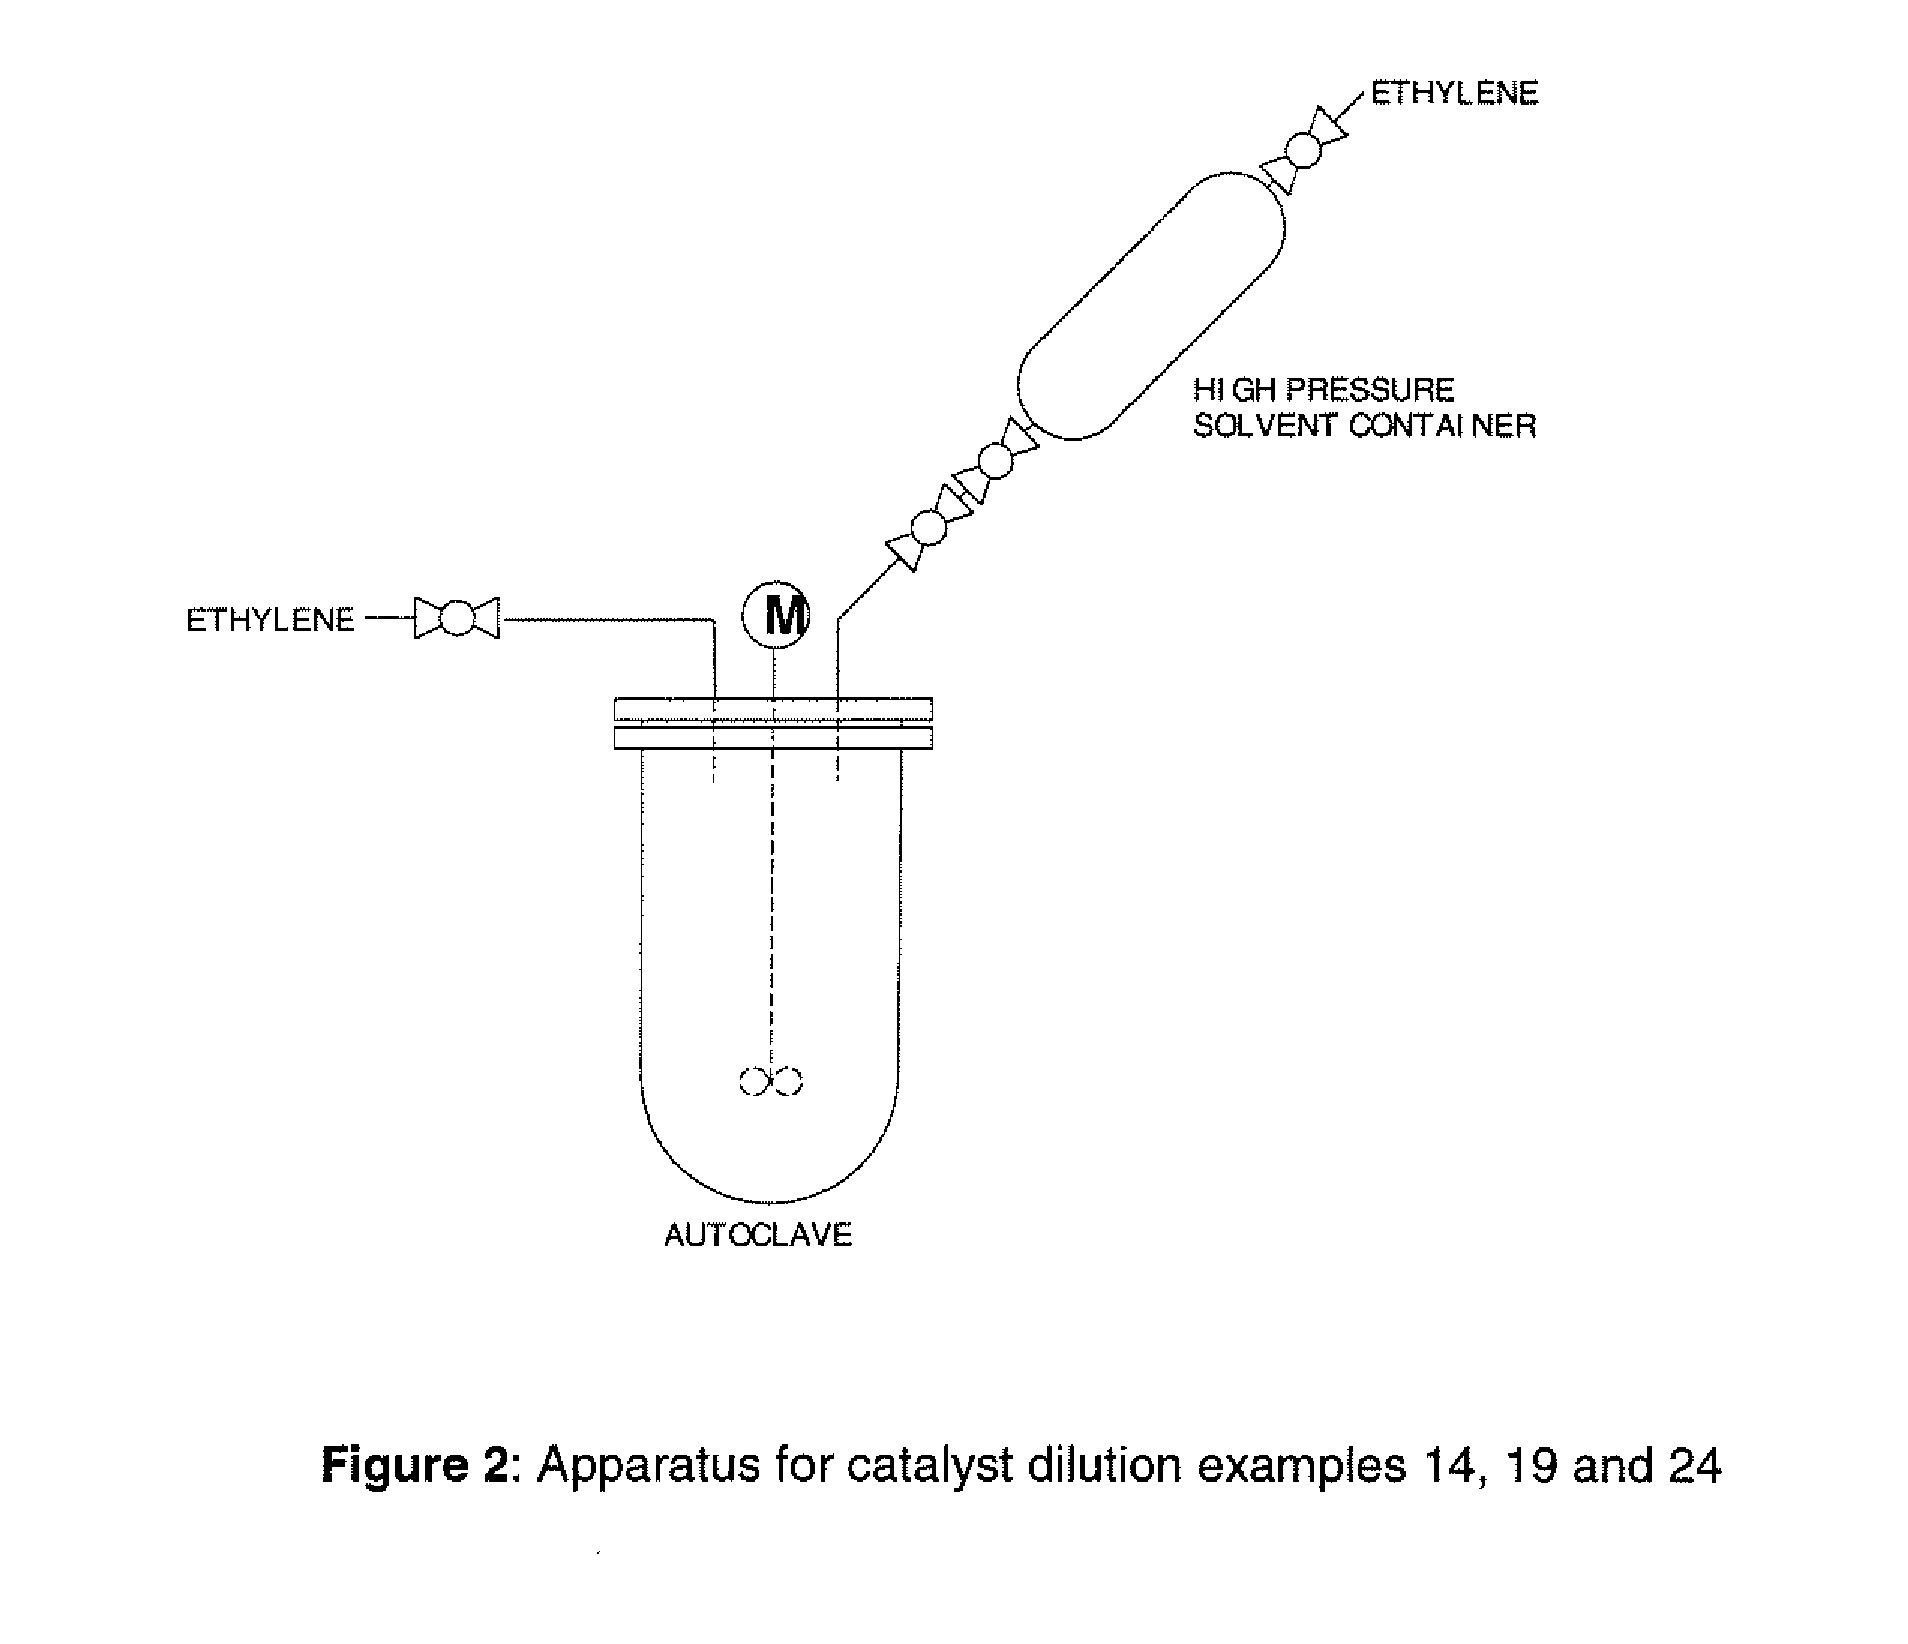 Oligomerisation of olefinic compounds in the presence of a diluted metal containing activator